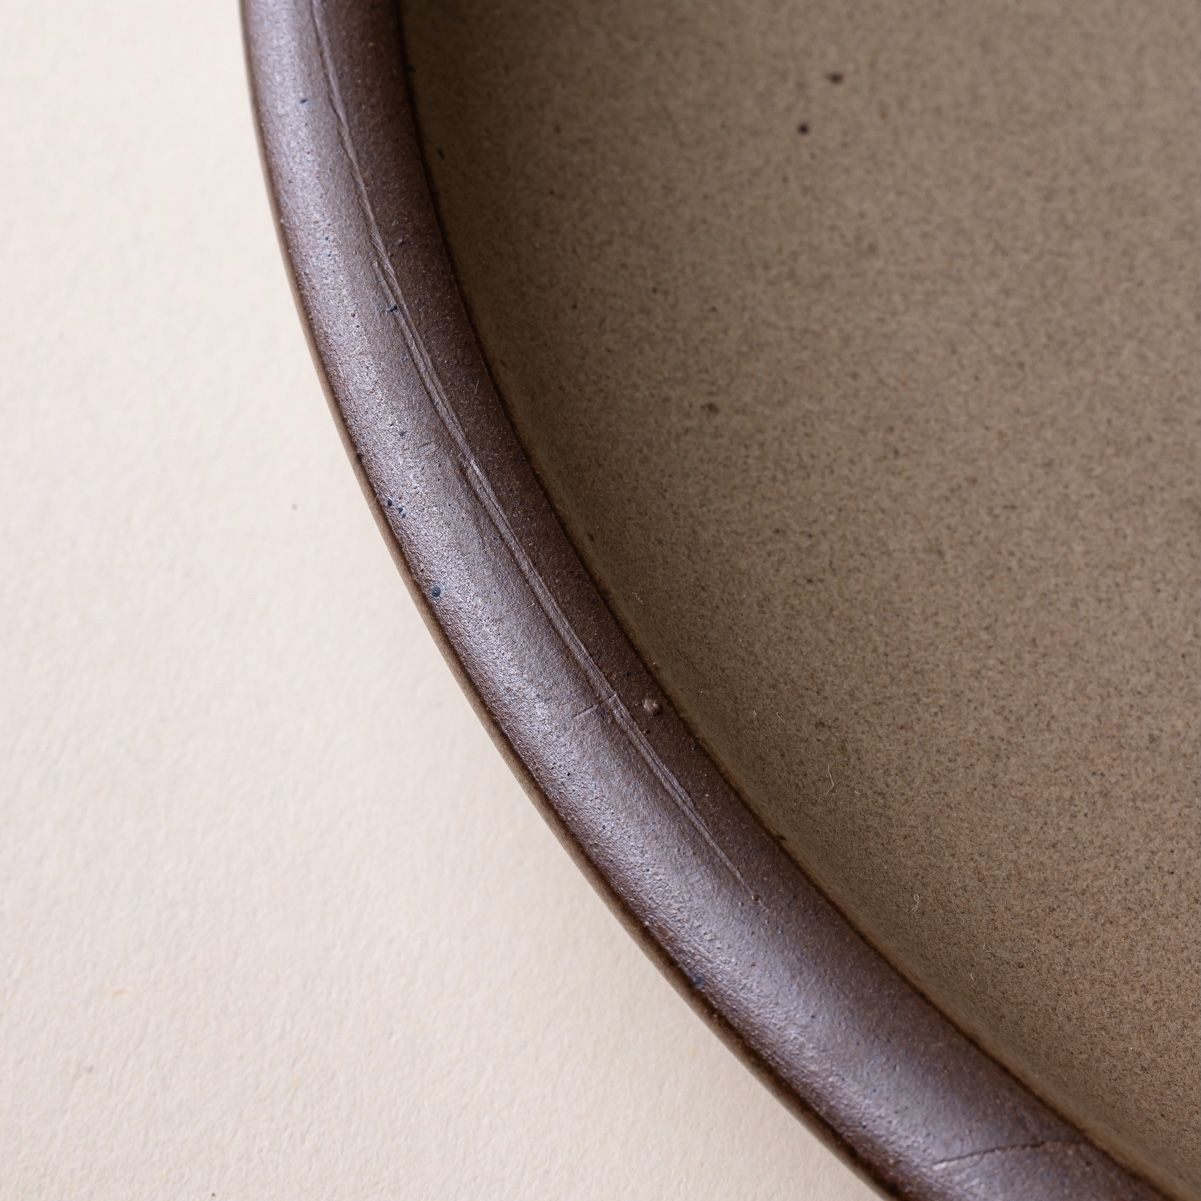 A closeup of the unglazed rim of a plate with a scratch running down the rim.